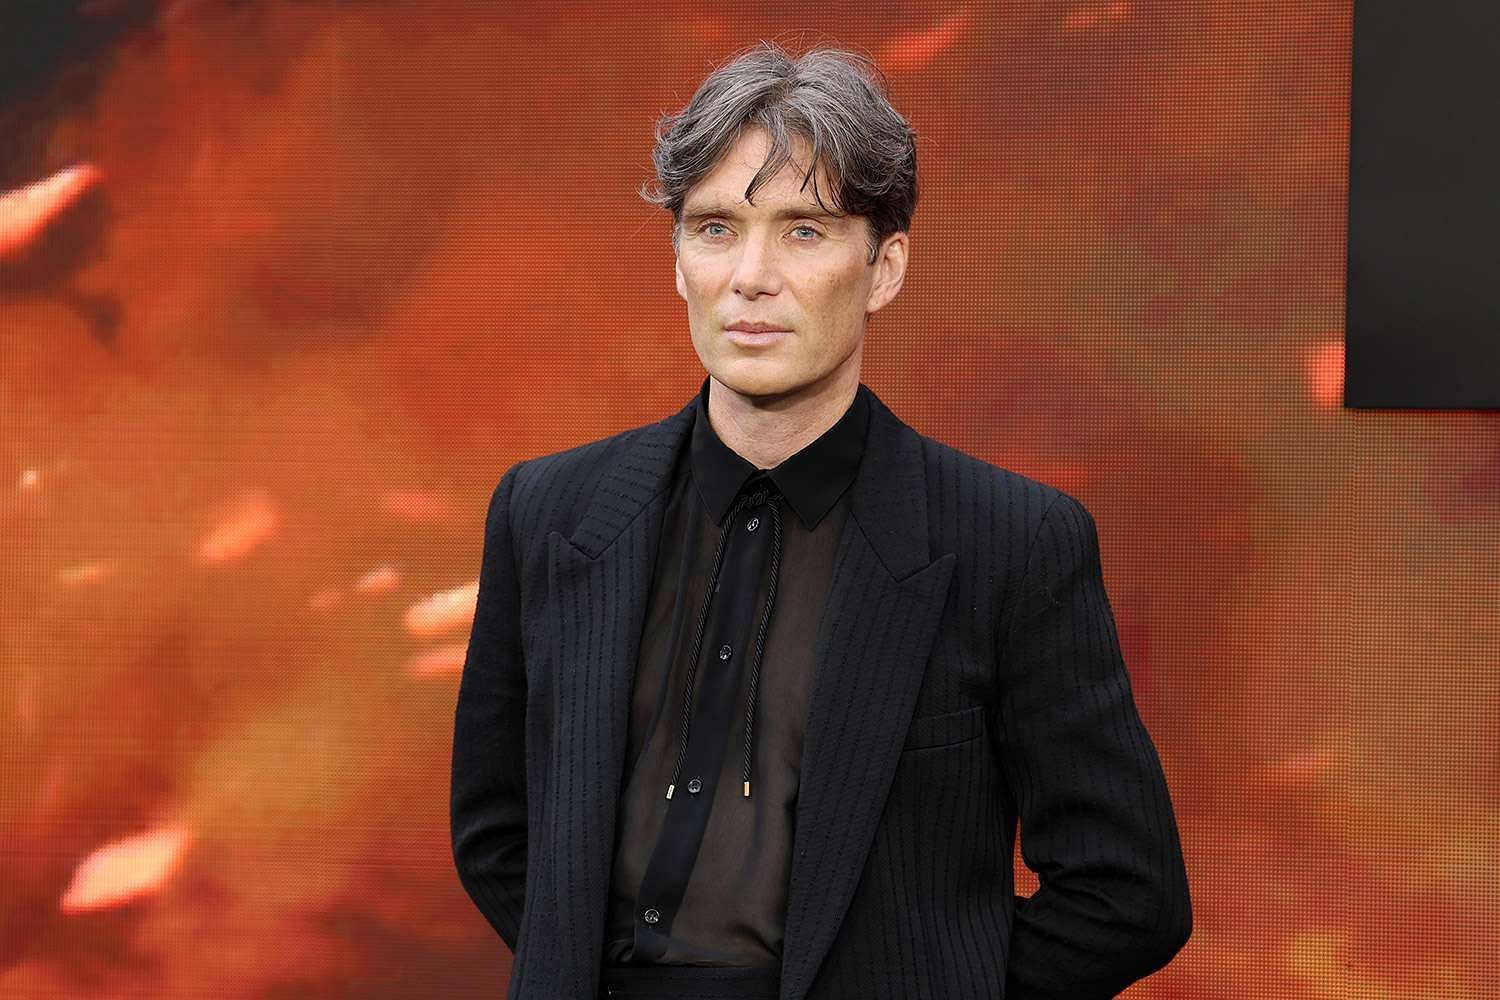 Where Does Cillian Murphy Live?